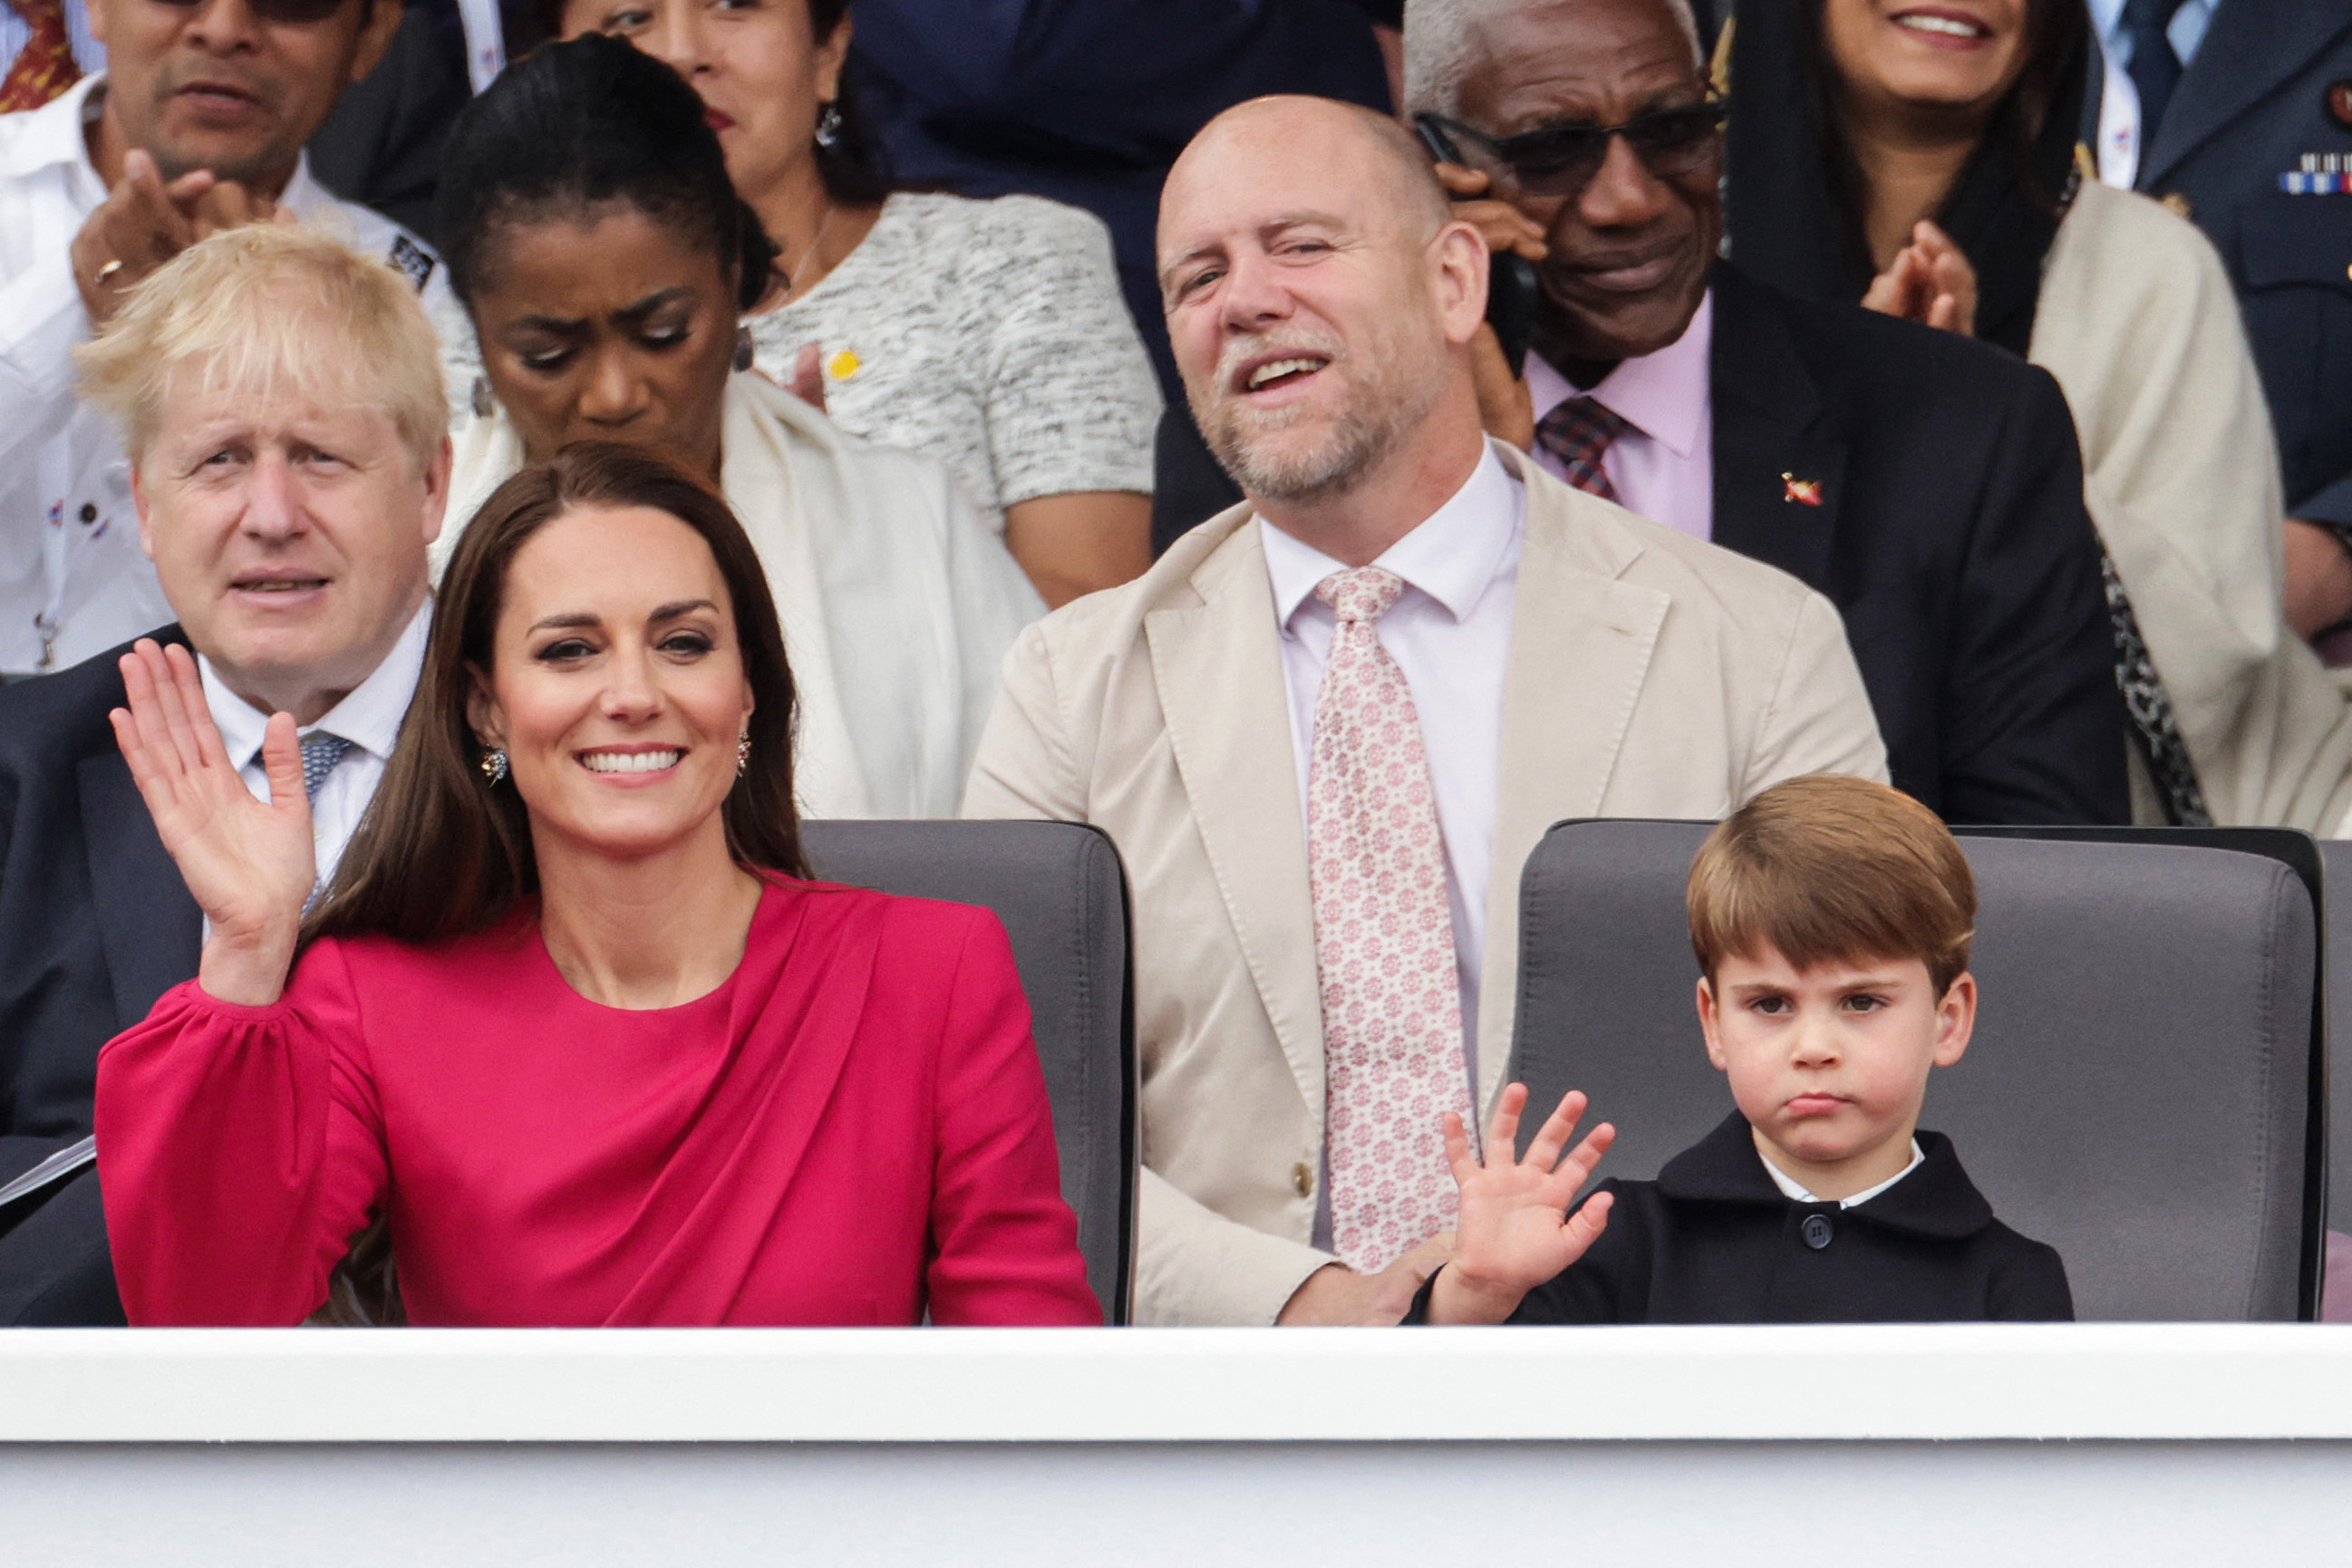 The smiling duchess and a glum-looking Prince Louis waving